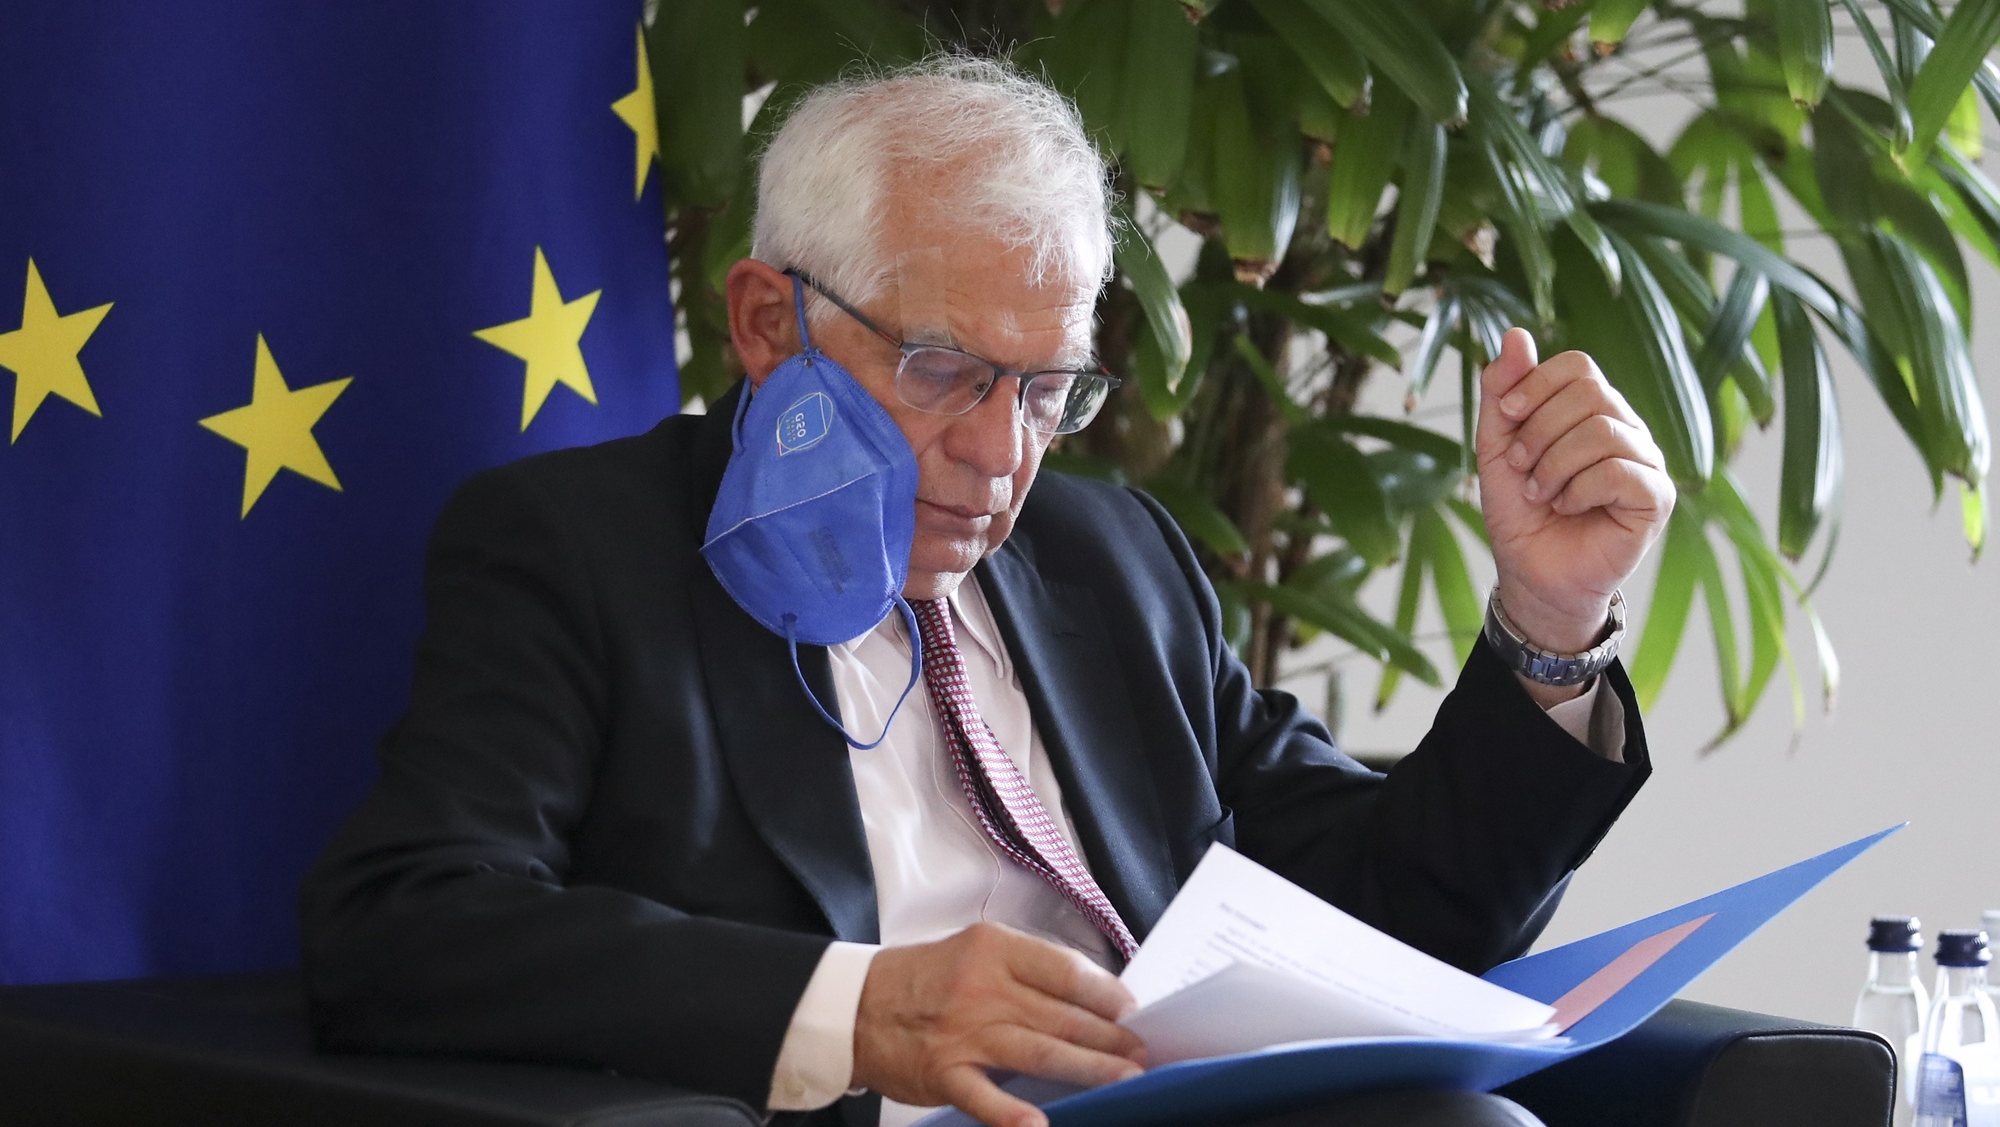 epa09341645 European Union foreign policy chief Josep Borrell sits down for a meeting with Zoran Tegeltija, Chairman of the Council of Ministers of Bosnia and Herzegovina, in Brussels, Belgium, 13 July 2021.  EPA/PASCAL ROSSIGNOL / POOL